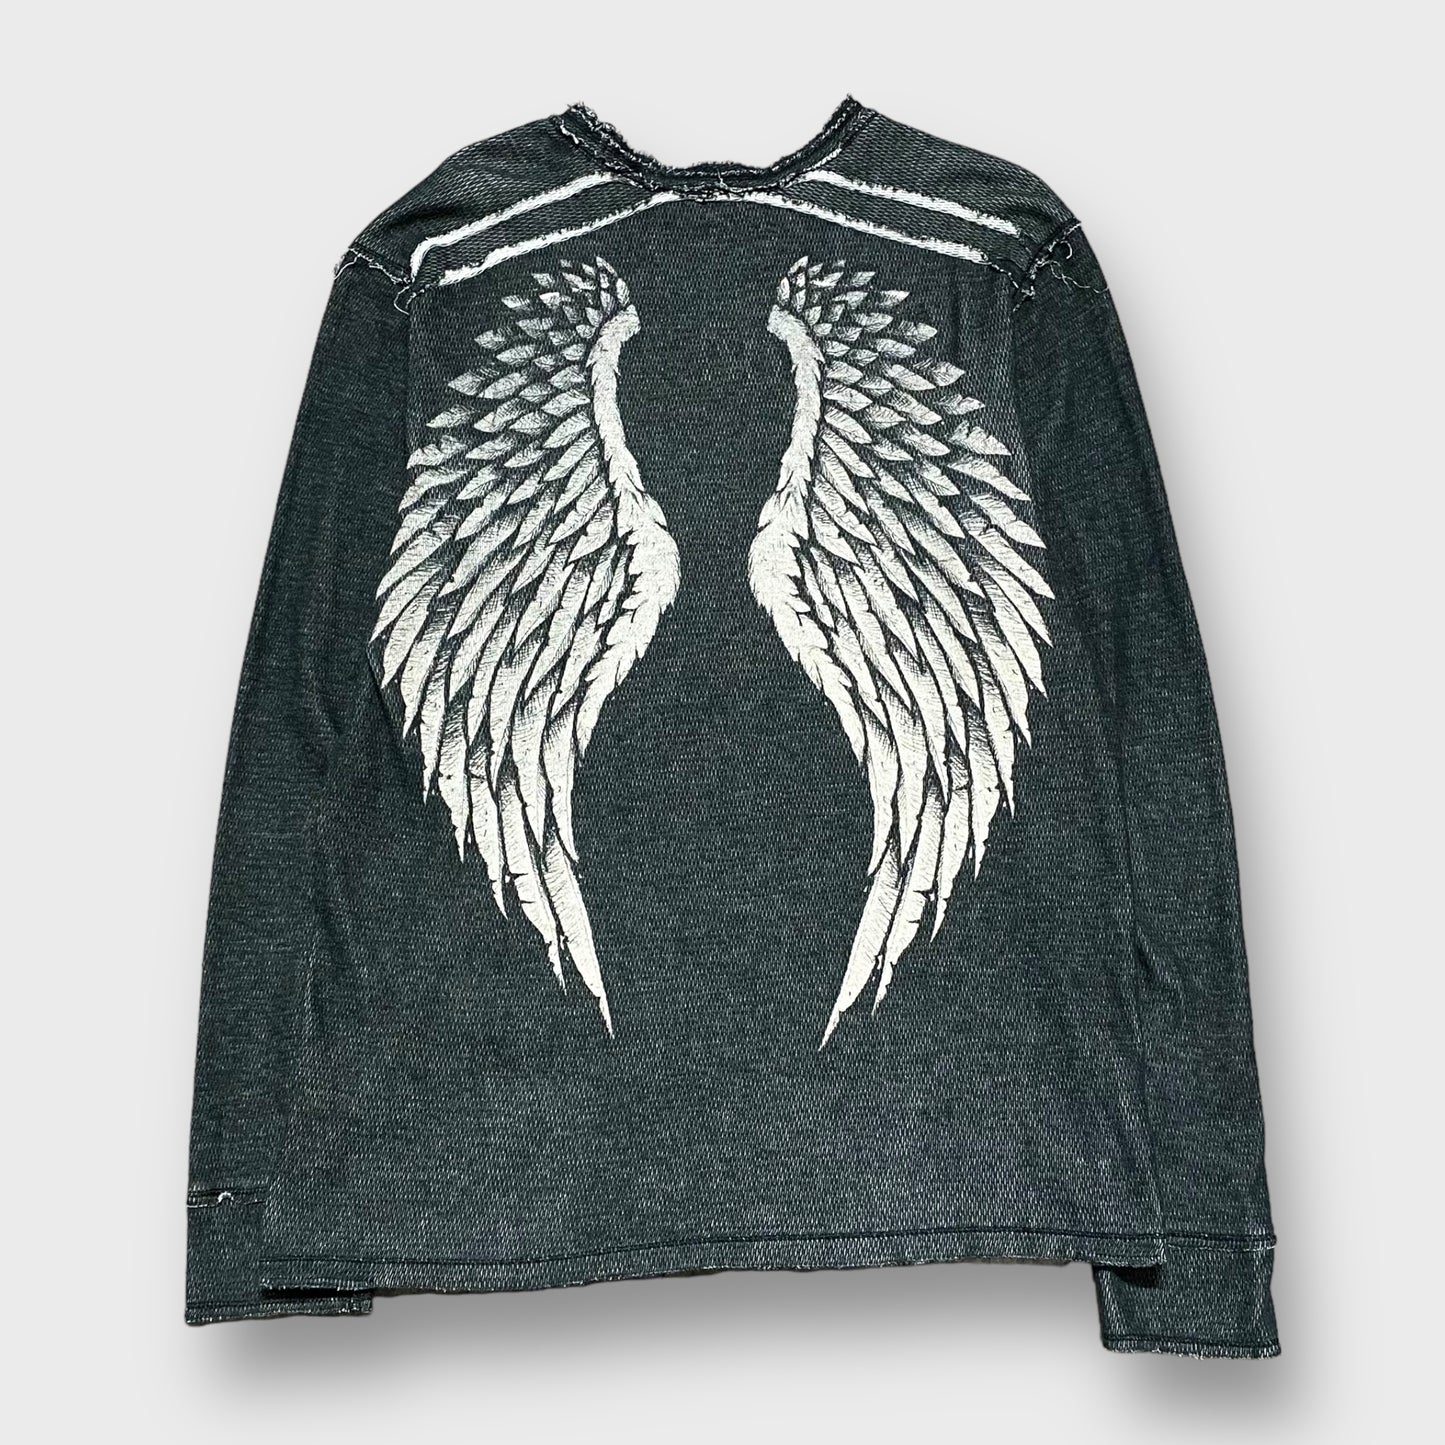 "Affliction" Wing design reversible thermal knit sweater